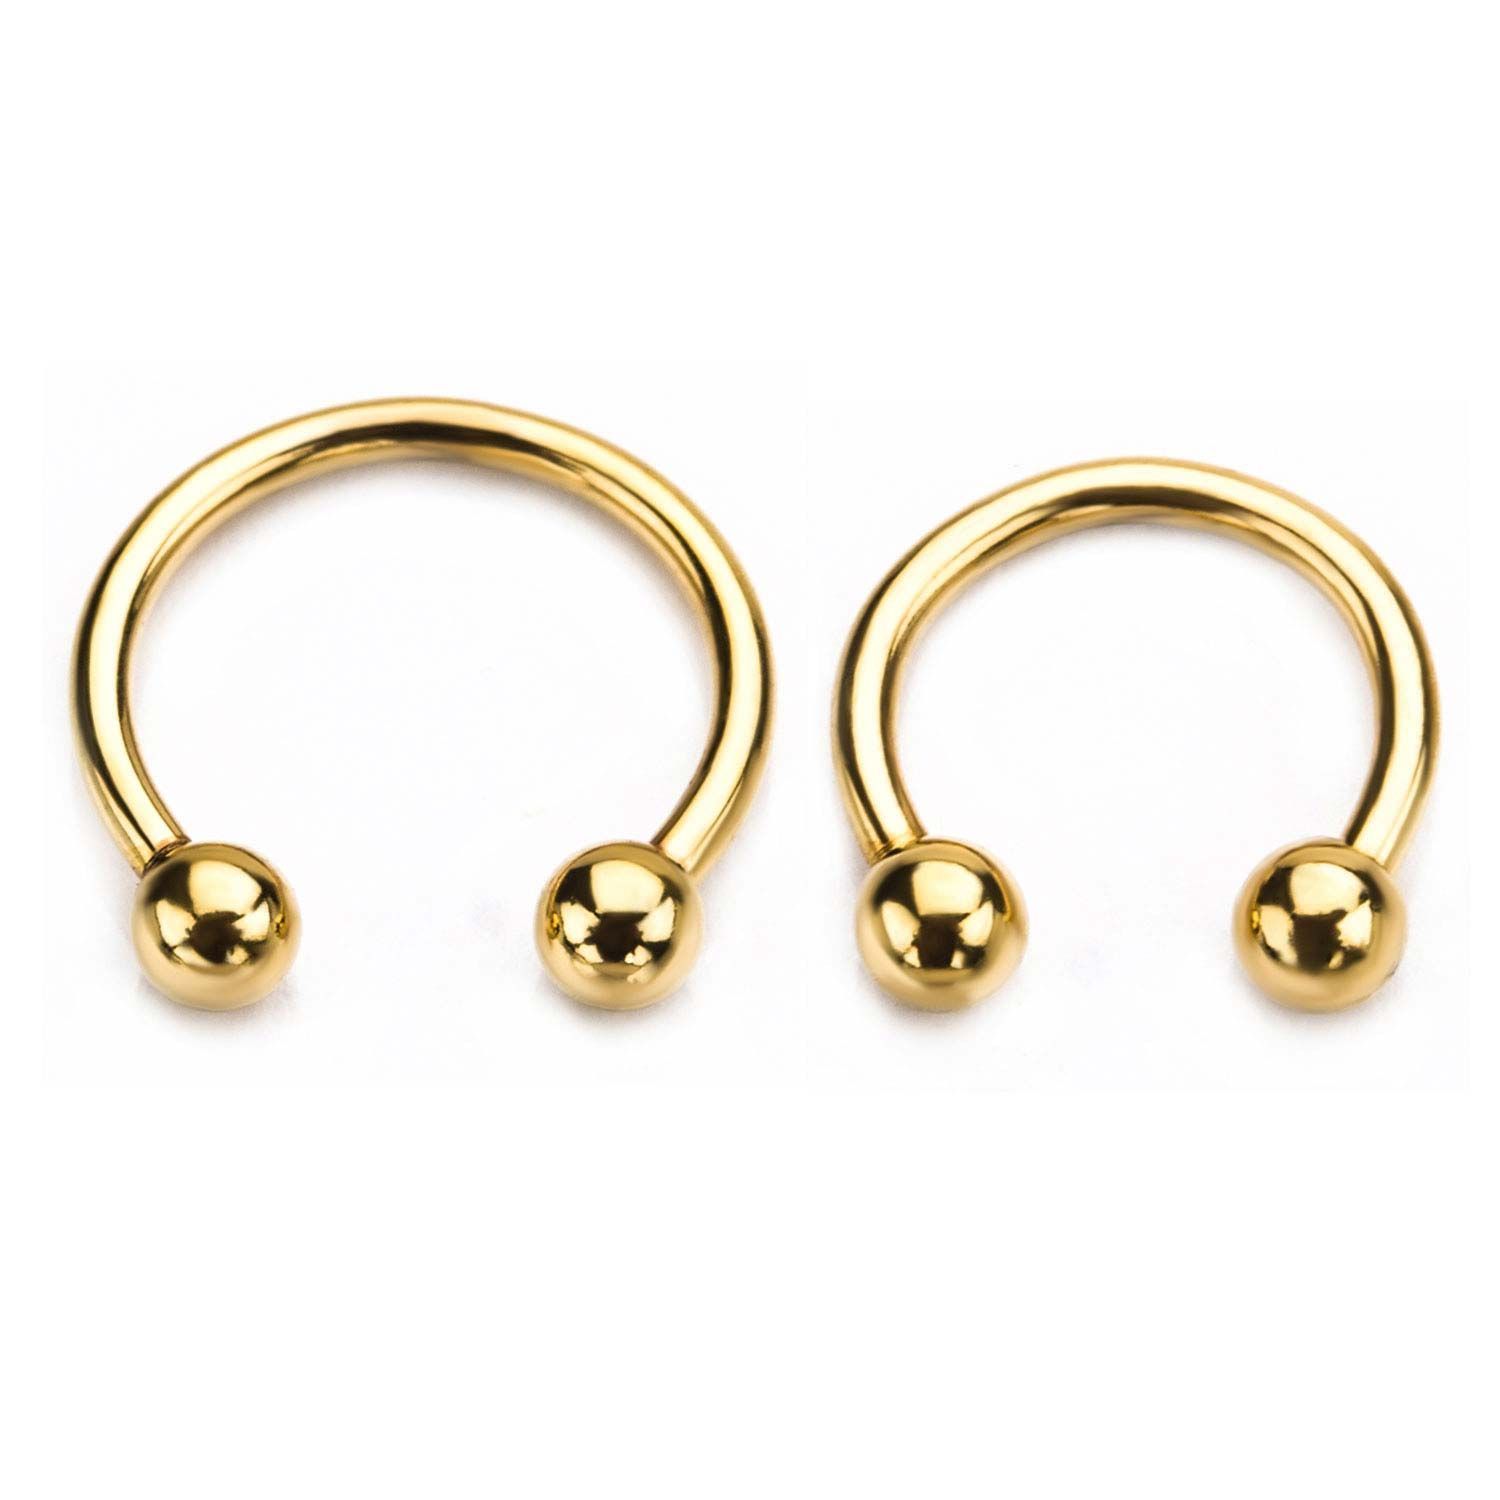 CIRCULAR BARBELL | HORSESHOE Gold Plated Horseshoes with ball ends sbvhgp -Rebel Bod-RebelBod